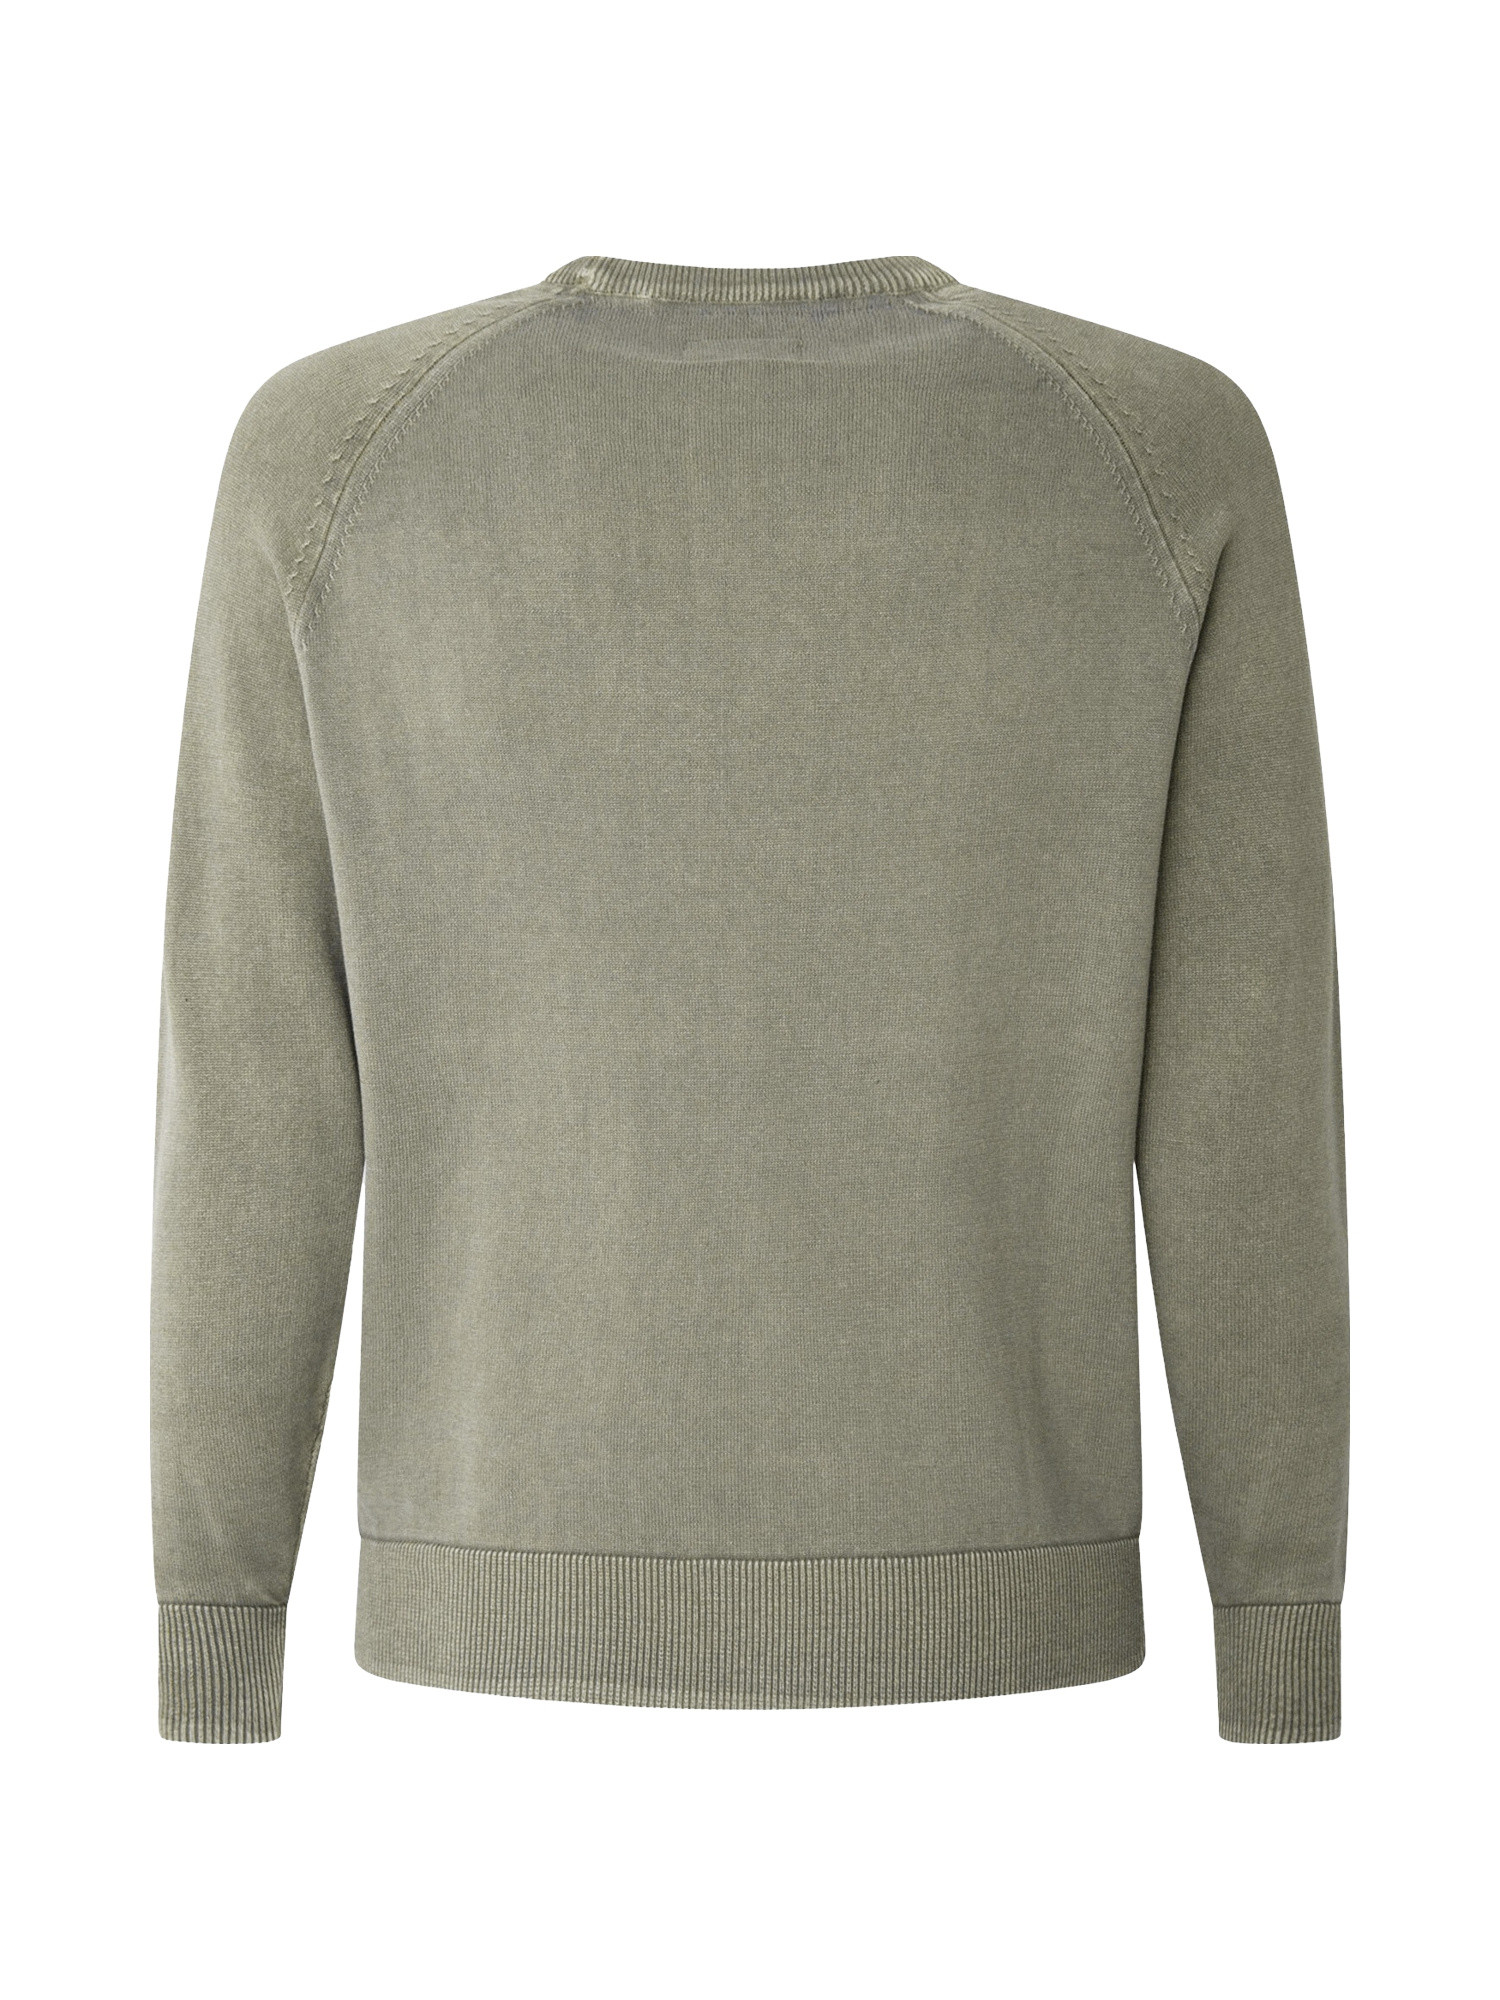 Pepe Jeans - Pullover girocollo in cotone, Verde, large image number 1